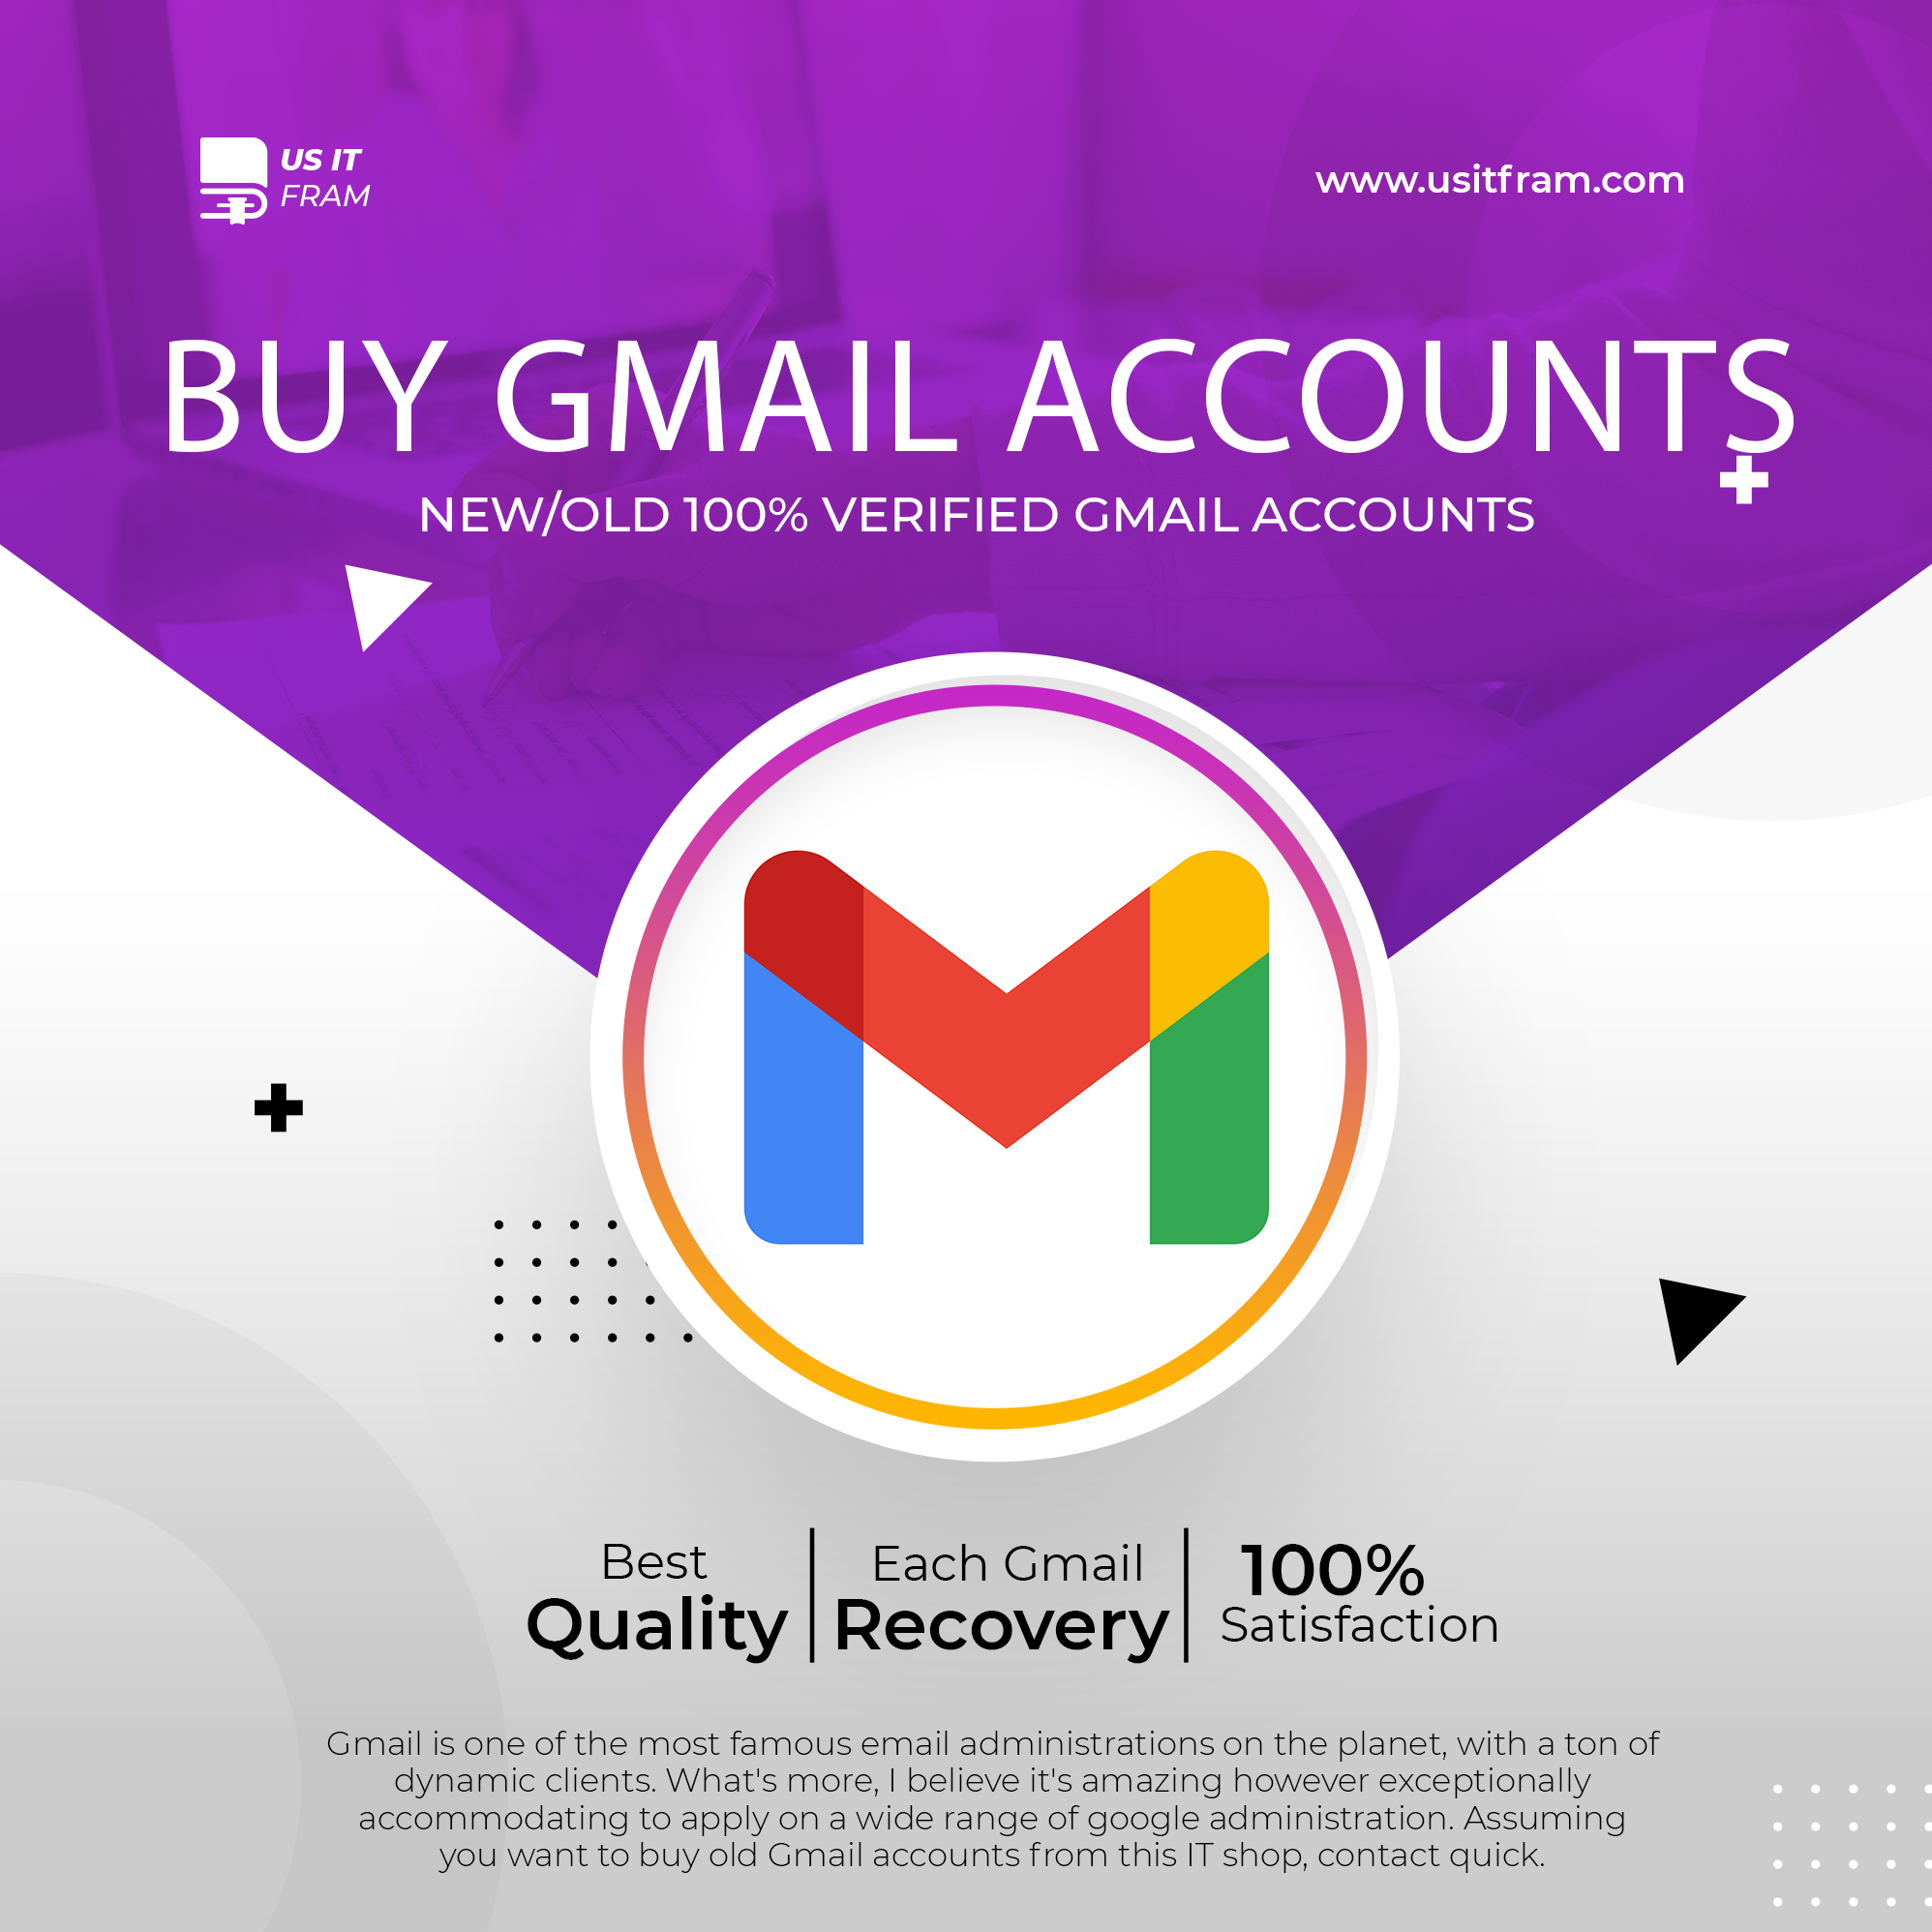 Buy Gmail Accounts - NEW/OLD 100% Verified - Best Quality 